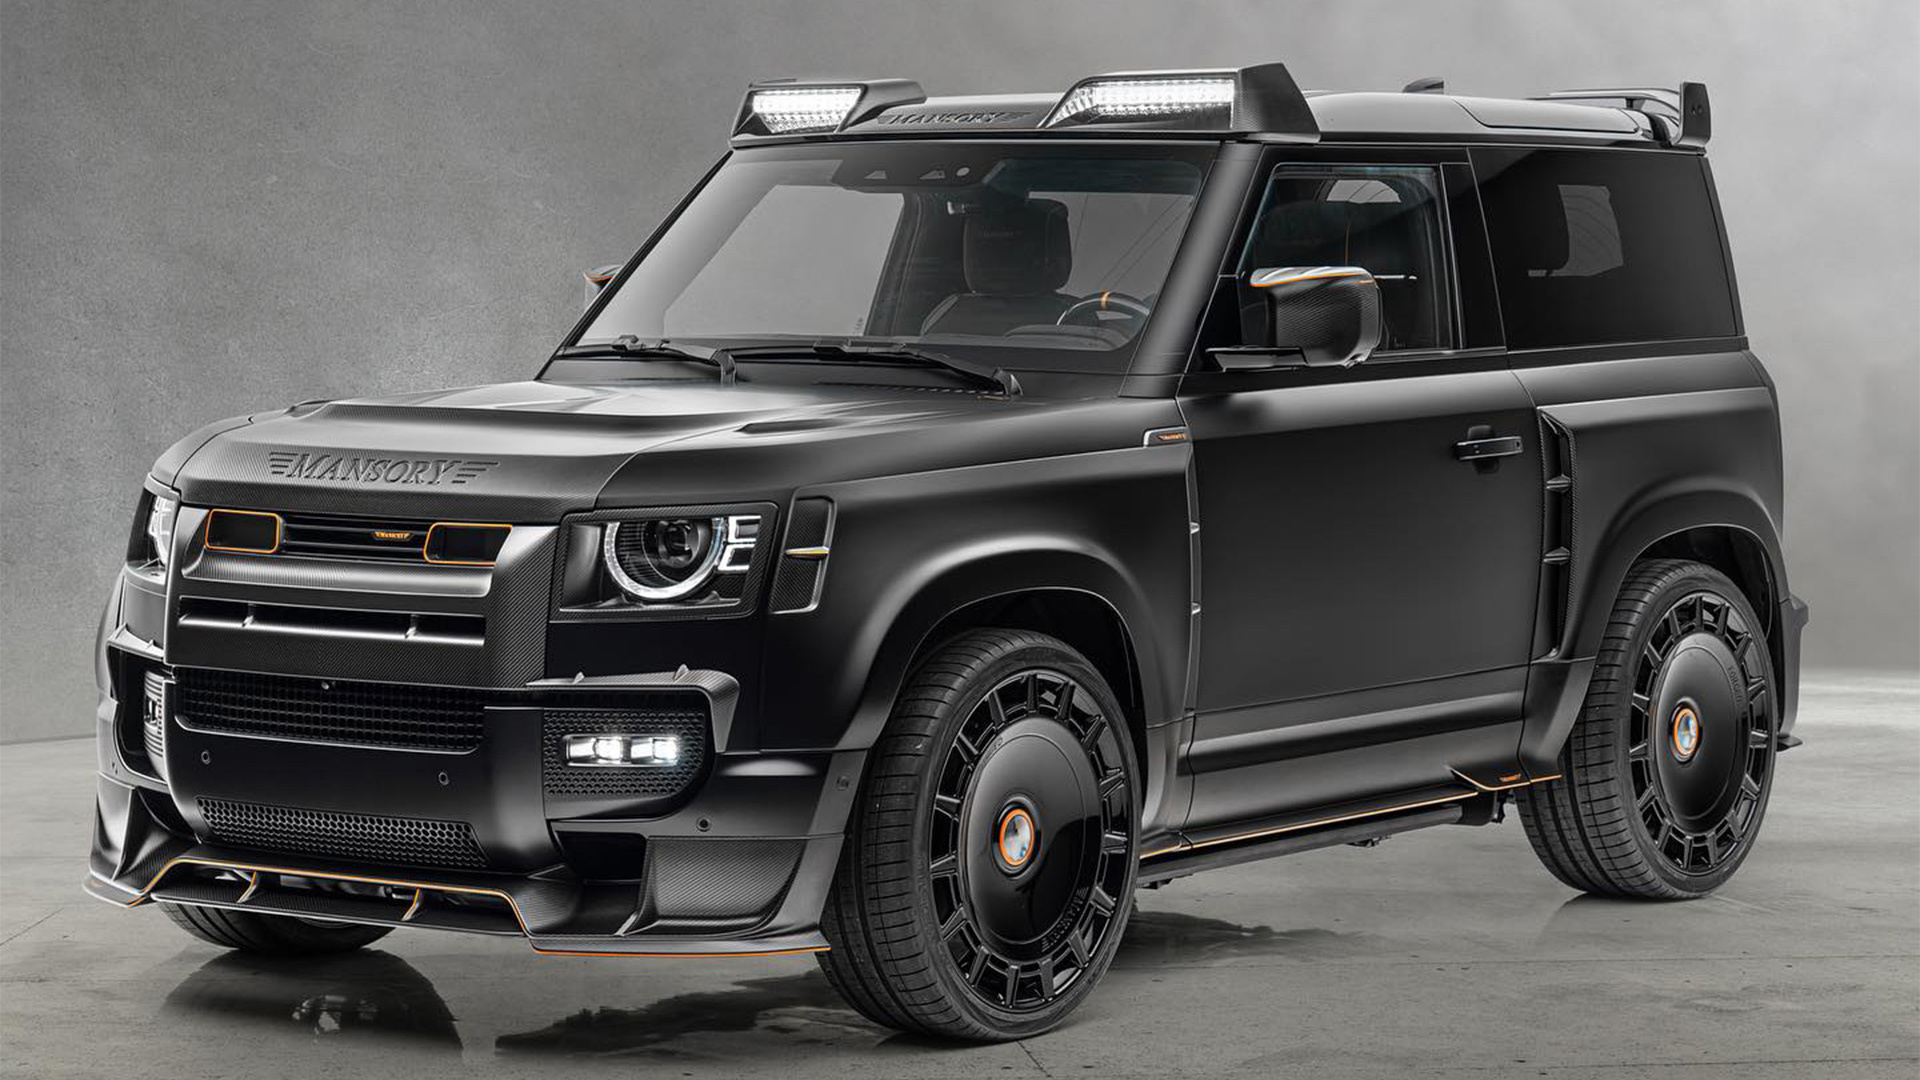 Mansory's Land Rover Defender V8 Black Edition Is The Ultimate Pose-Mobile